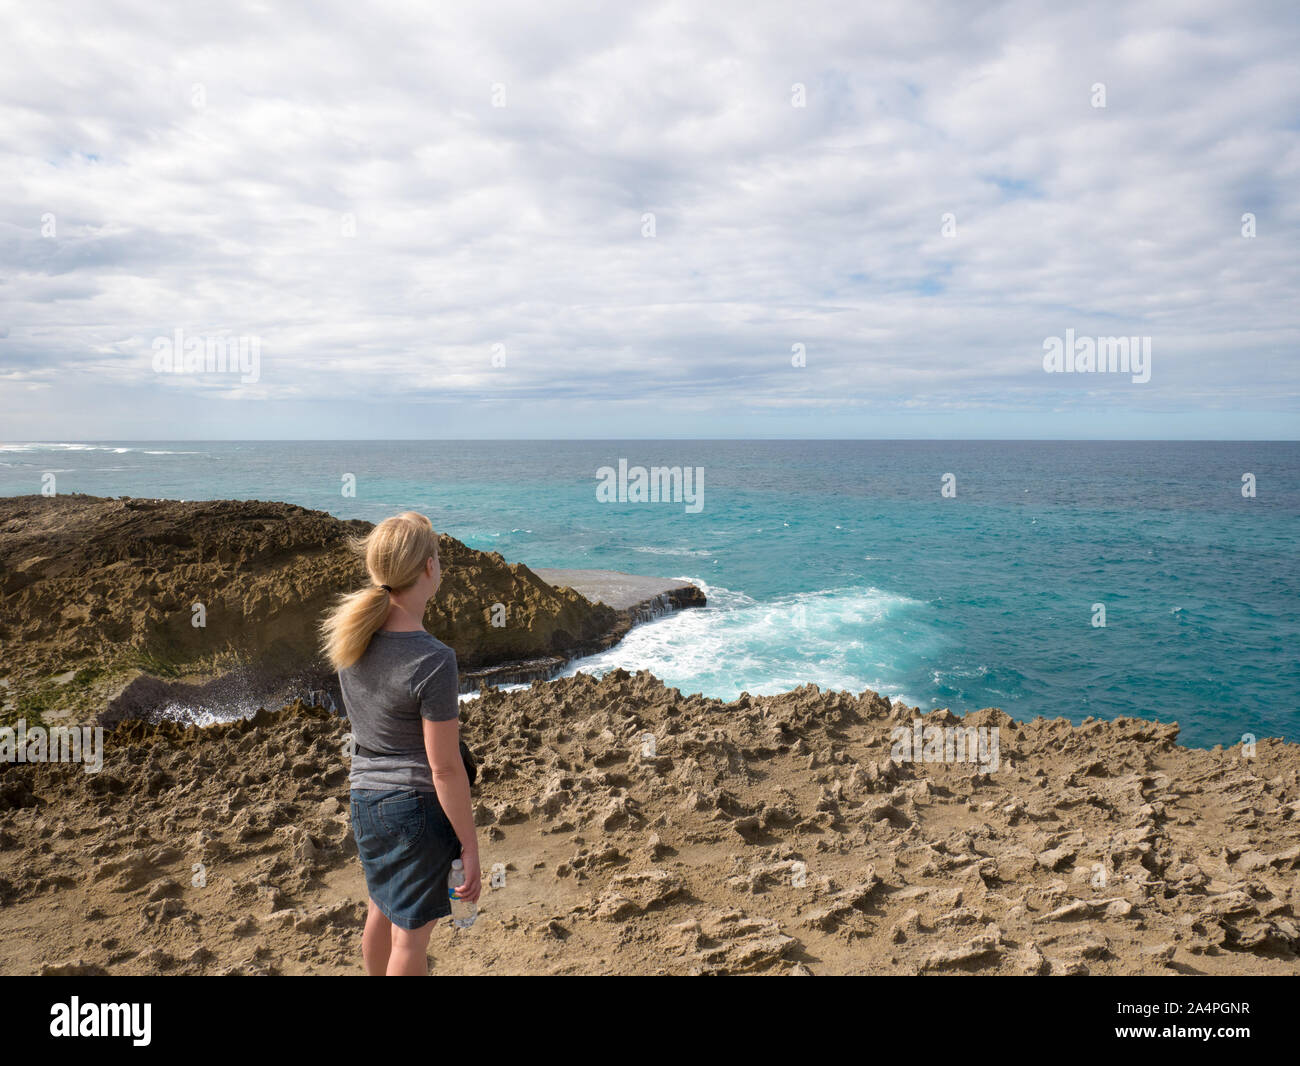 A woman is watching Huge waves collide against a reef near Jobos Beach in Puerto Rico, USA. Stock Photo